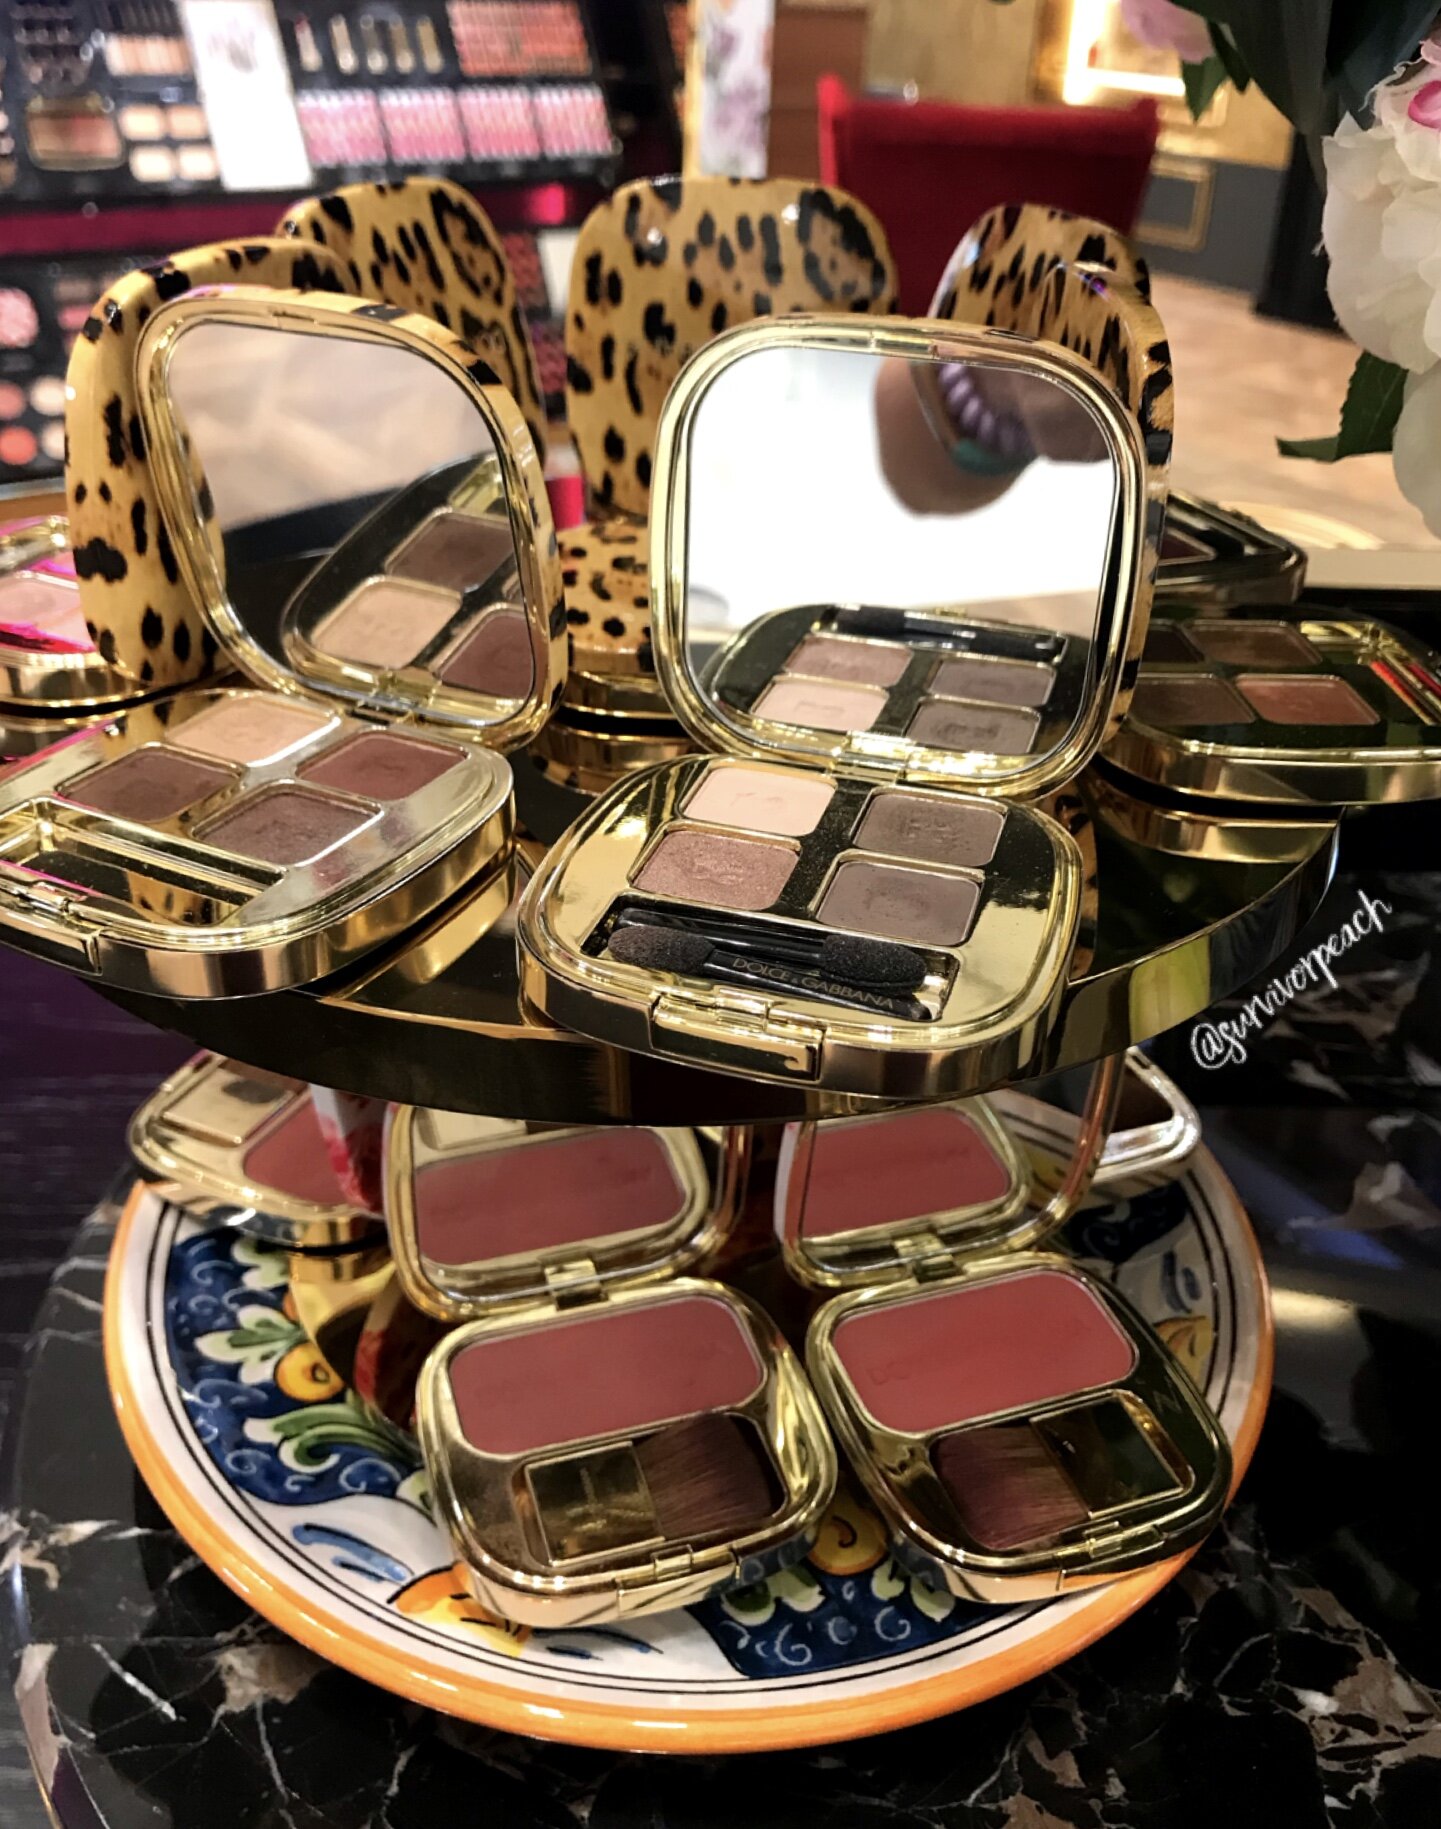 buy dolce and gabbana makeup online